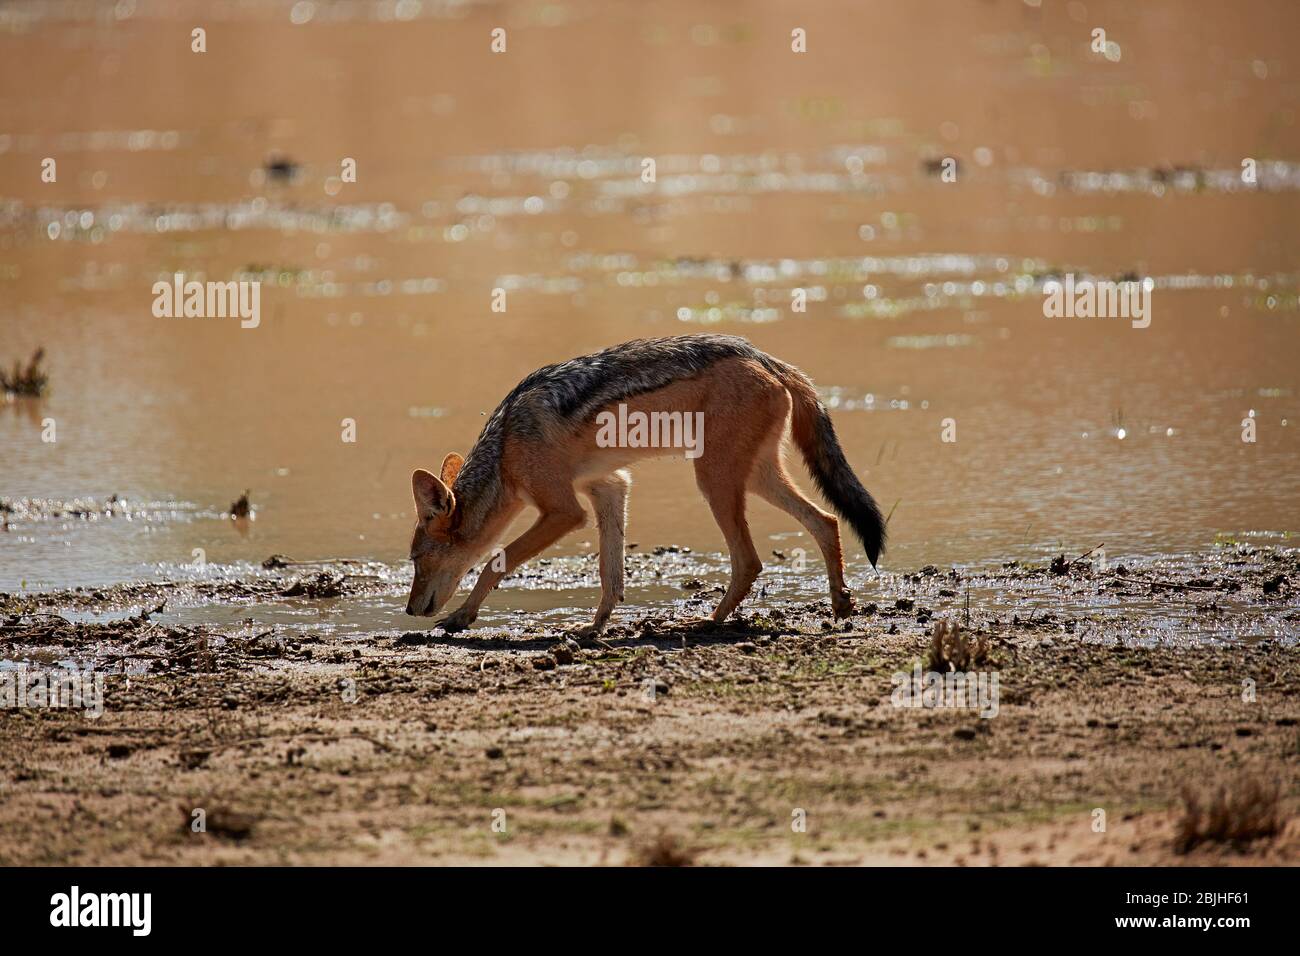 Black-backed jackal (Canis mesomelas), Kgalagadi Transfrontier Park, South Africa Stock Photo